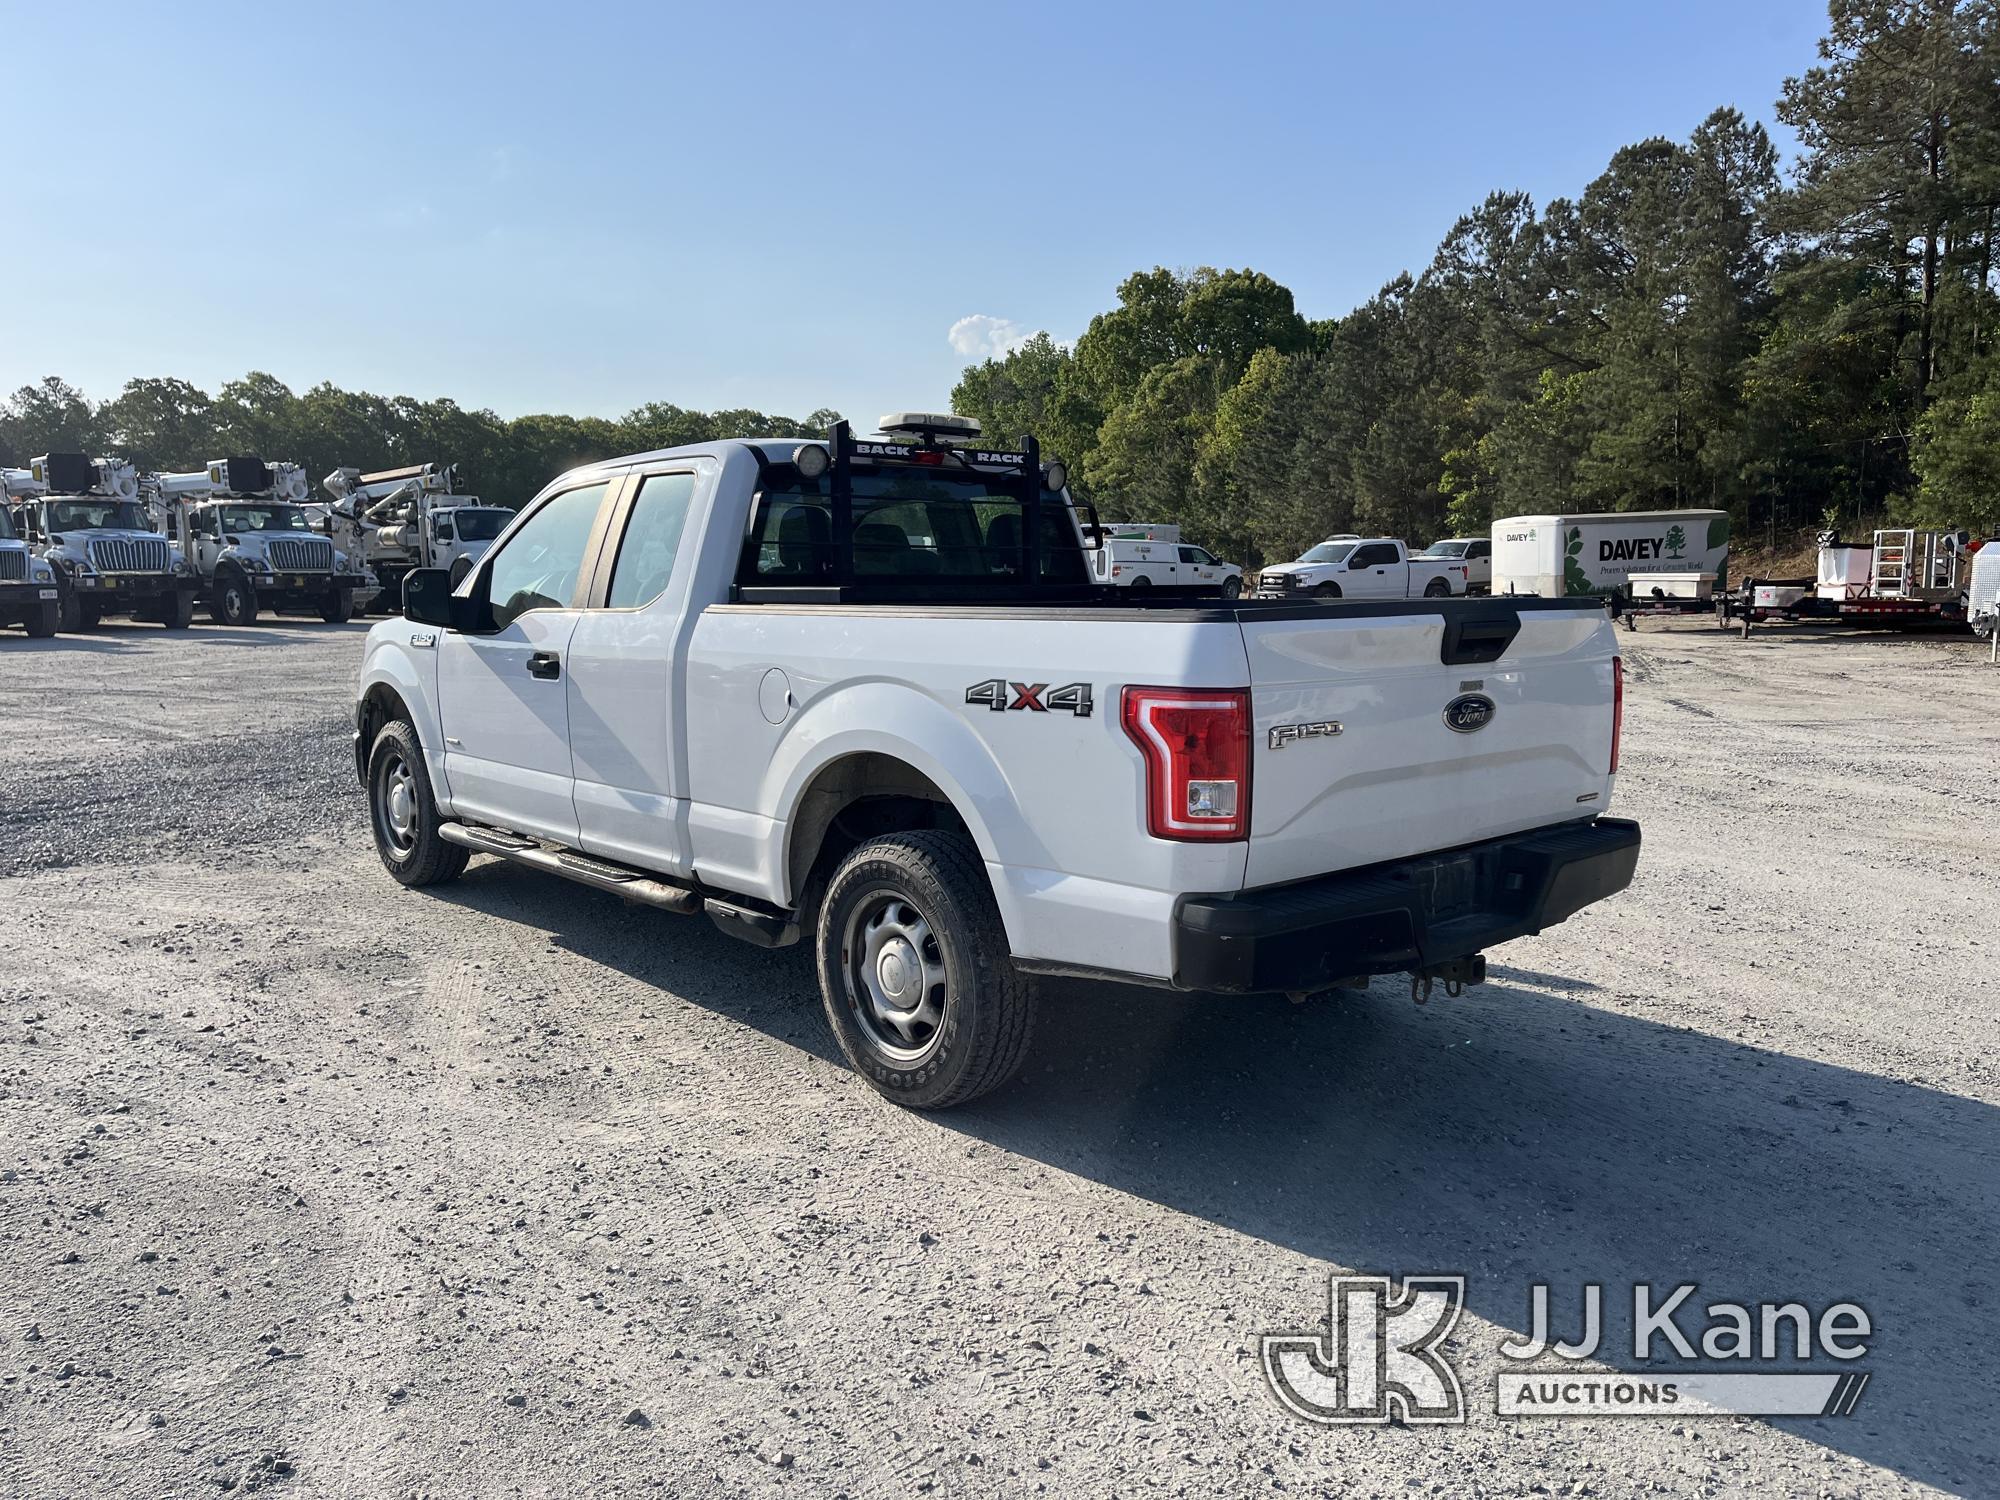 (Chester, VA) 2015 Ford F150 4x4 Extended-Cab Pickup Truck Runs & Moves